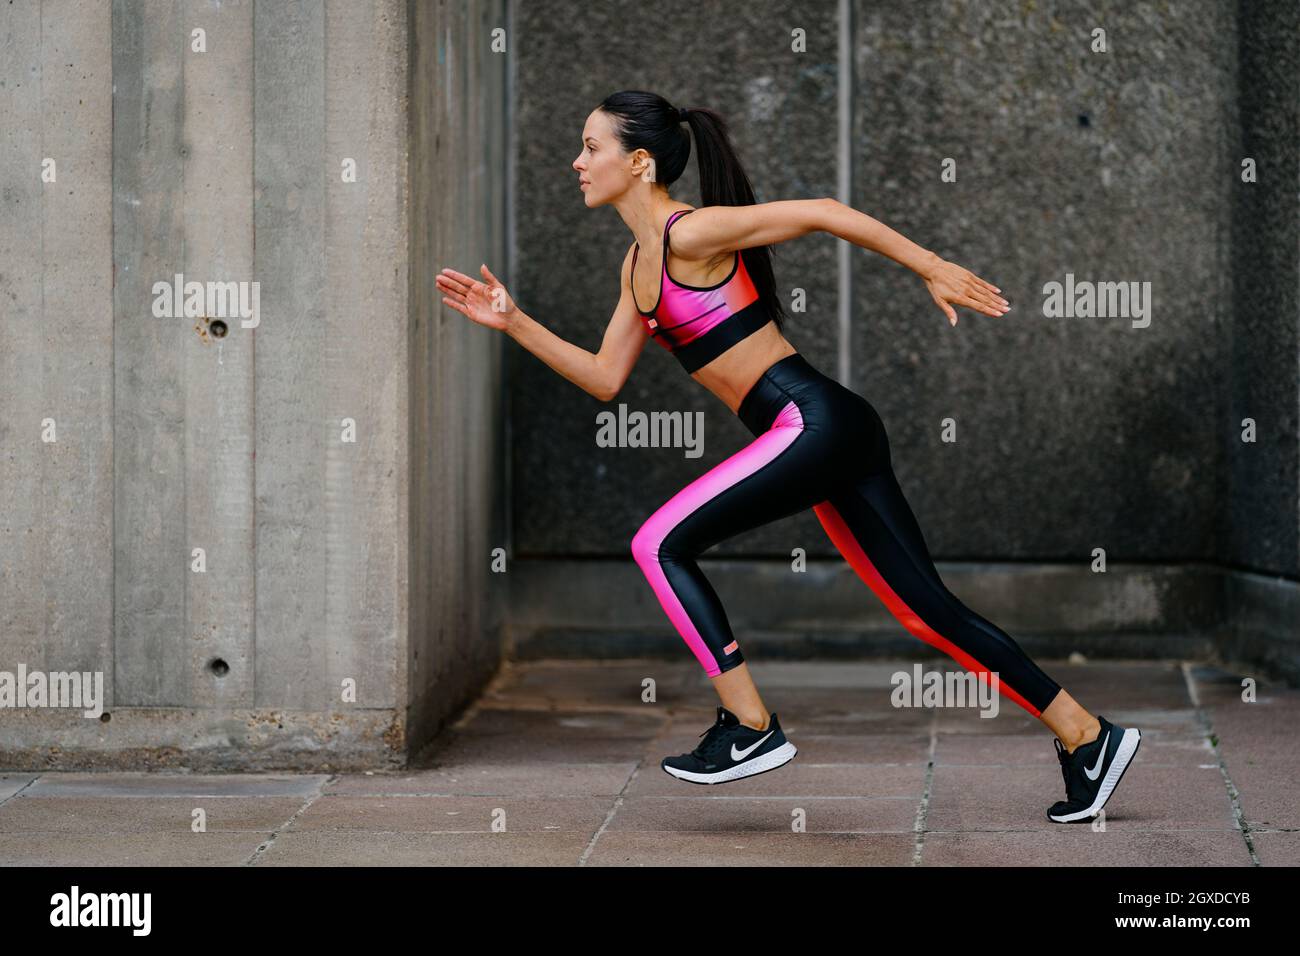 An athletic woman in a pink sports outfit running in an urban environment Stock Photo